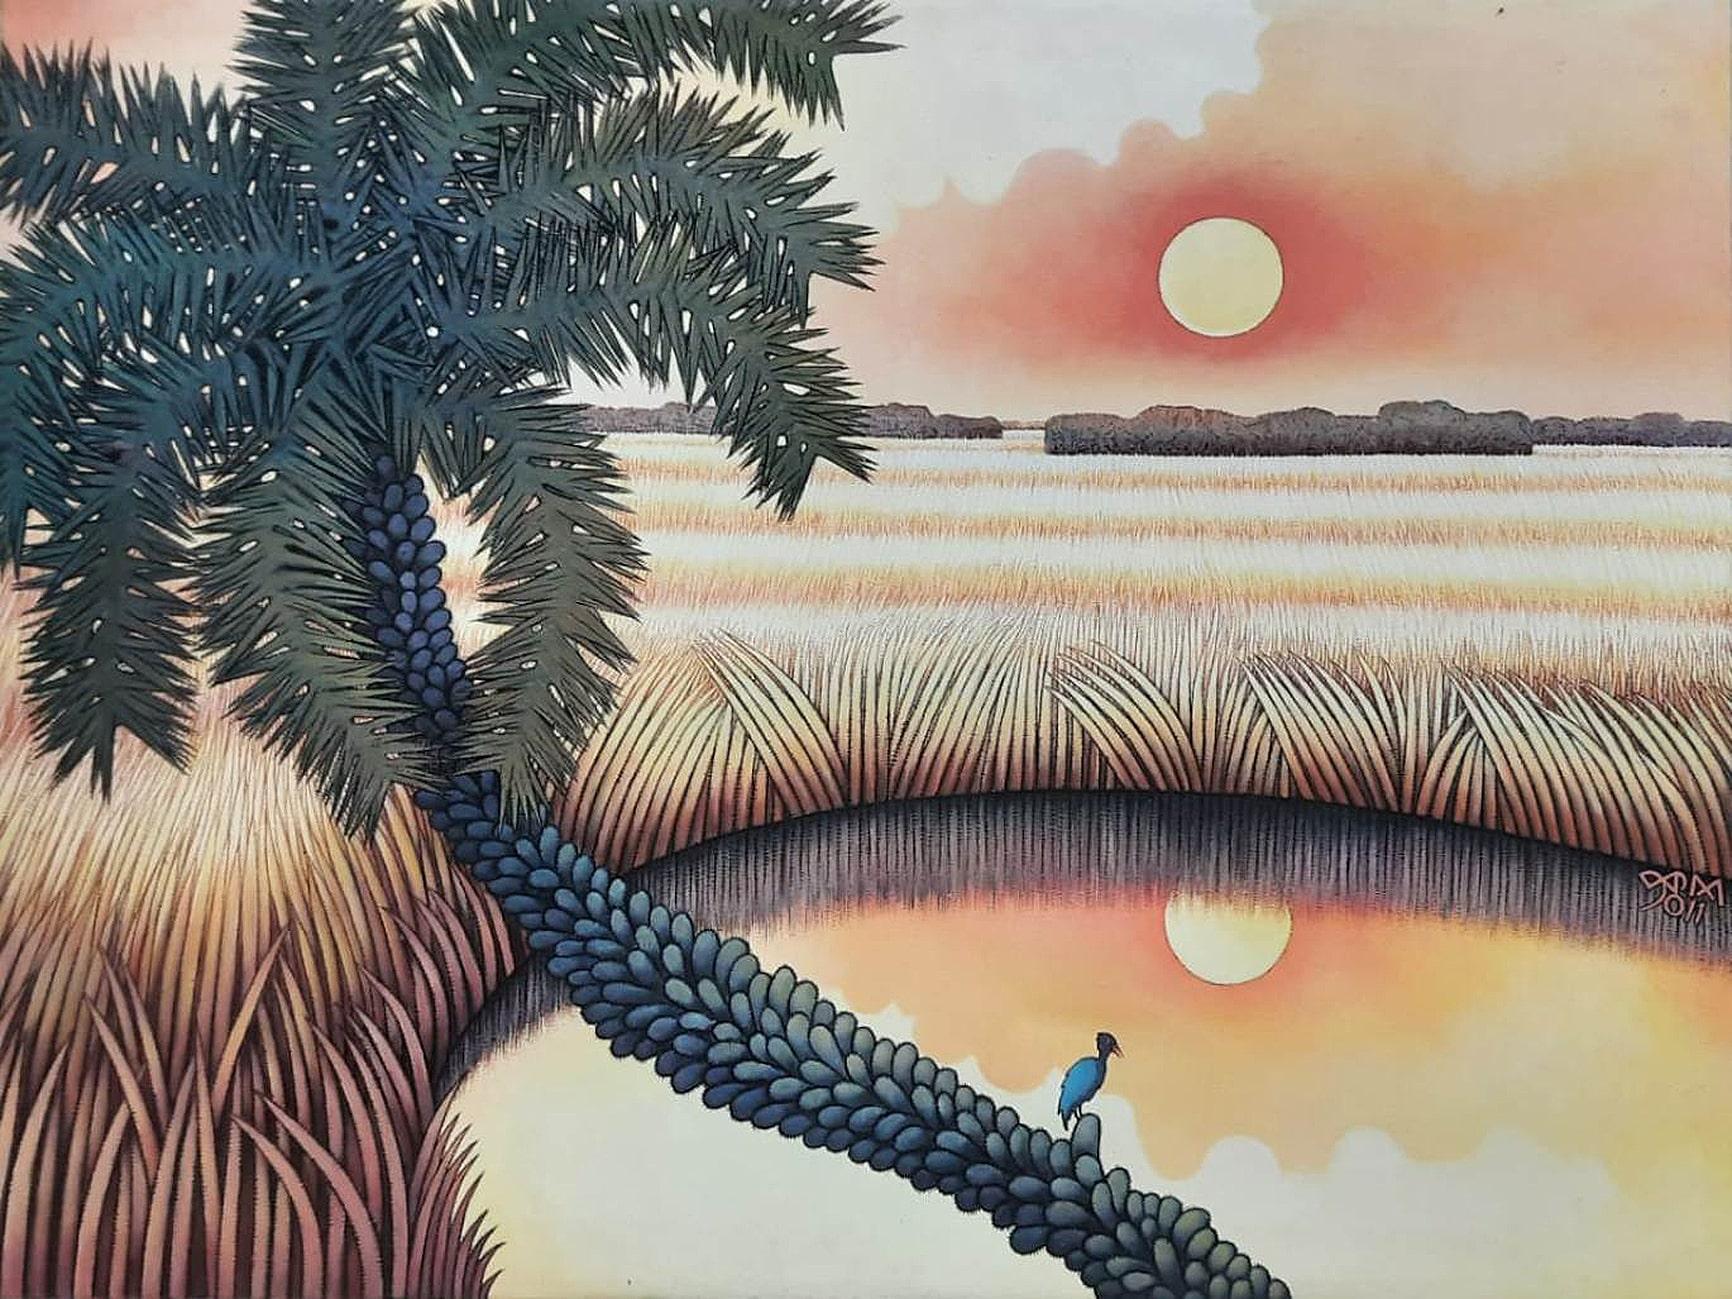 Prokash Karmakar Landscape Painting - Untitled, Acrylic on Canvas by Modern Indian Artist "In Stock"